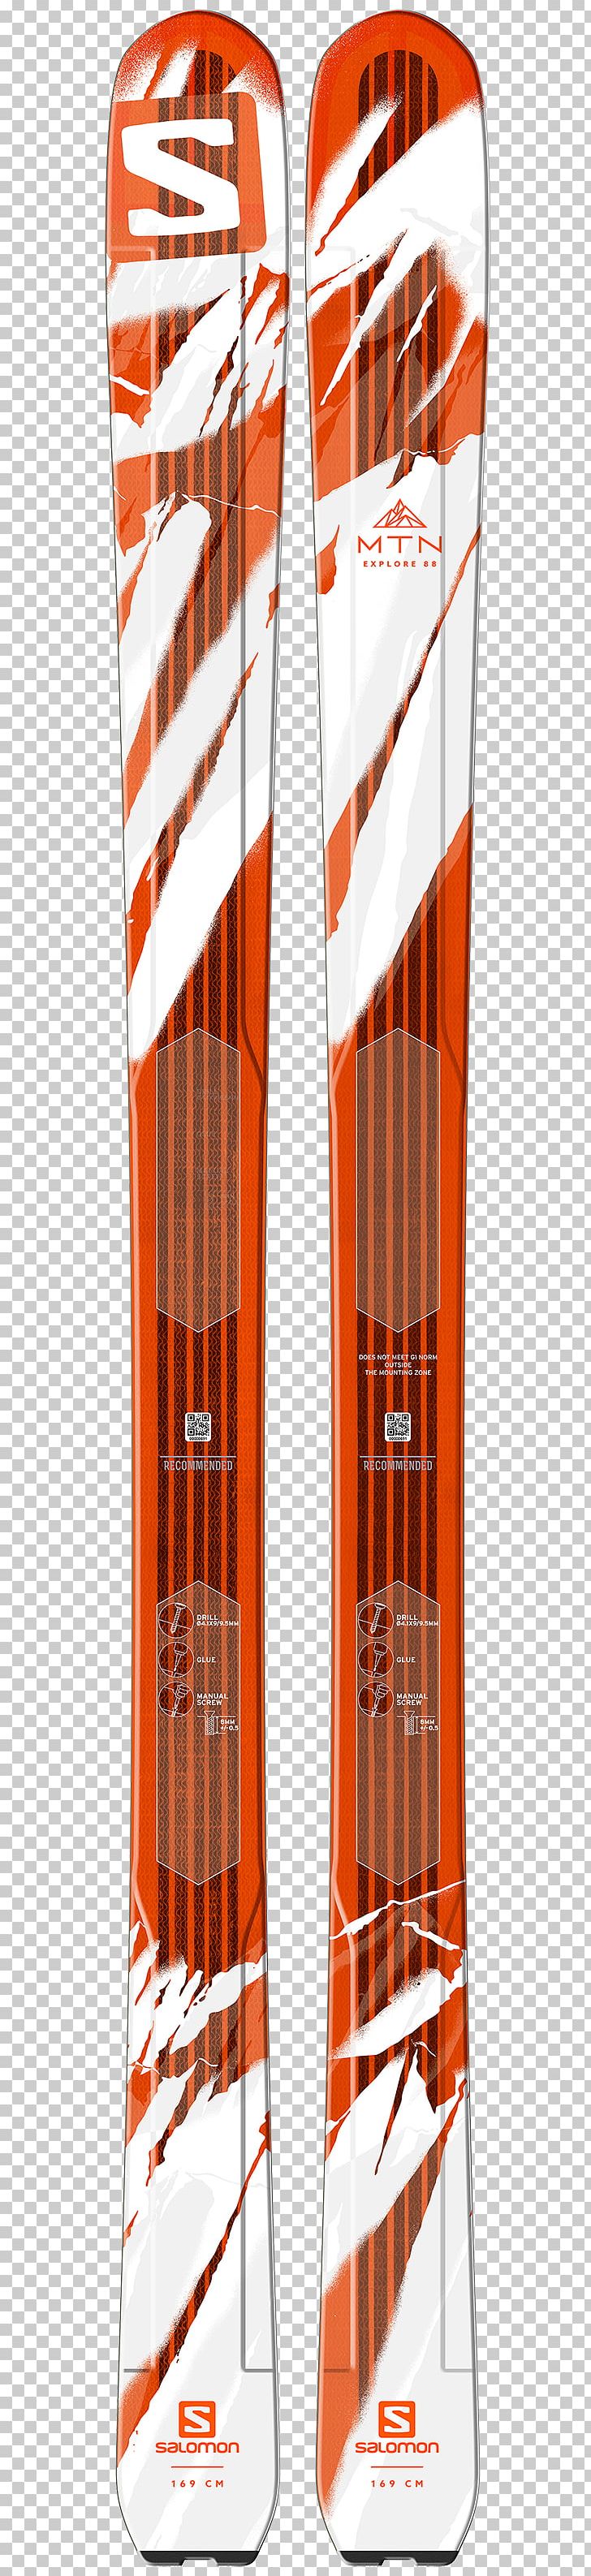 Ski Touring Alpine Skiing Salomon Group Ski Bindings PNG, Clipart, Alpine Skiing, Backcountry Skiing, Downhill, Explore, Fischer Free PNG Download